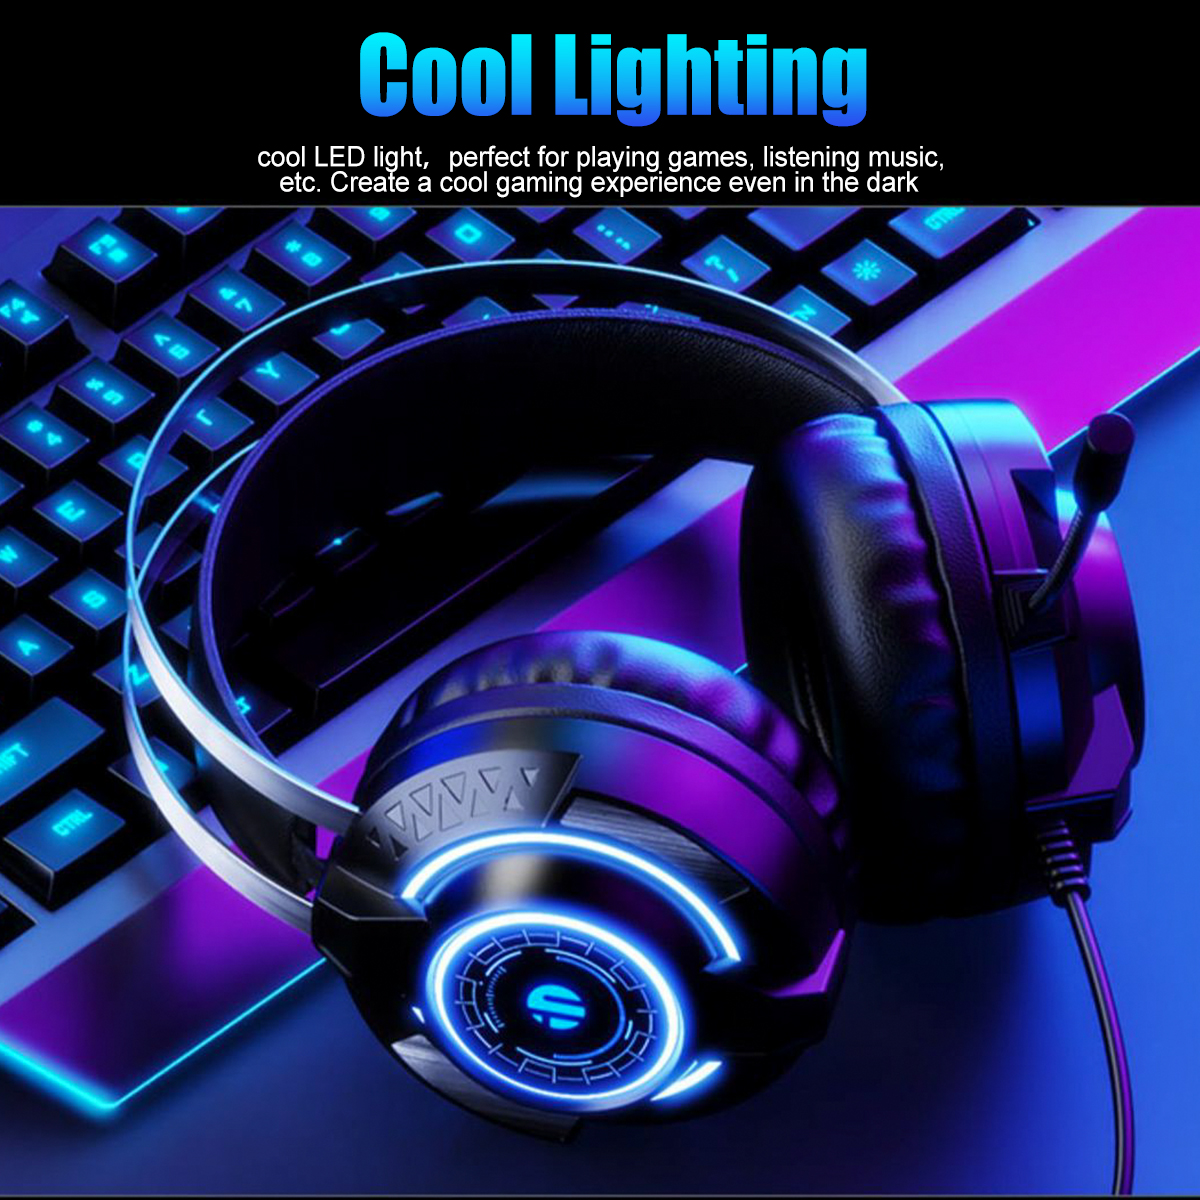 G2-Gaming-Headset-RGB-Light-Head-Mounted-Wired-Headset-For-Desktop-Computers-Laptops-1795933-8